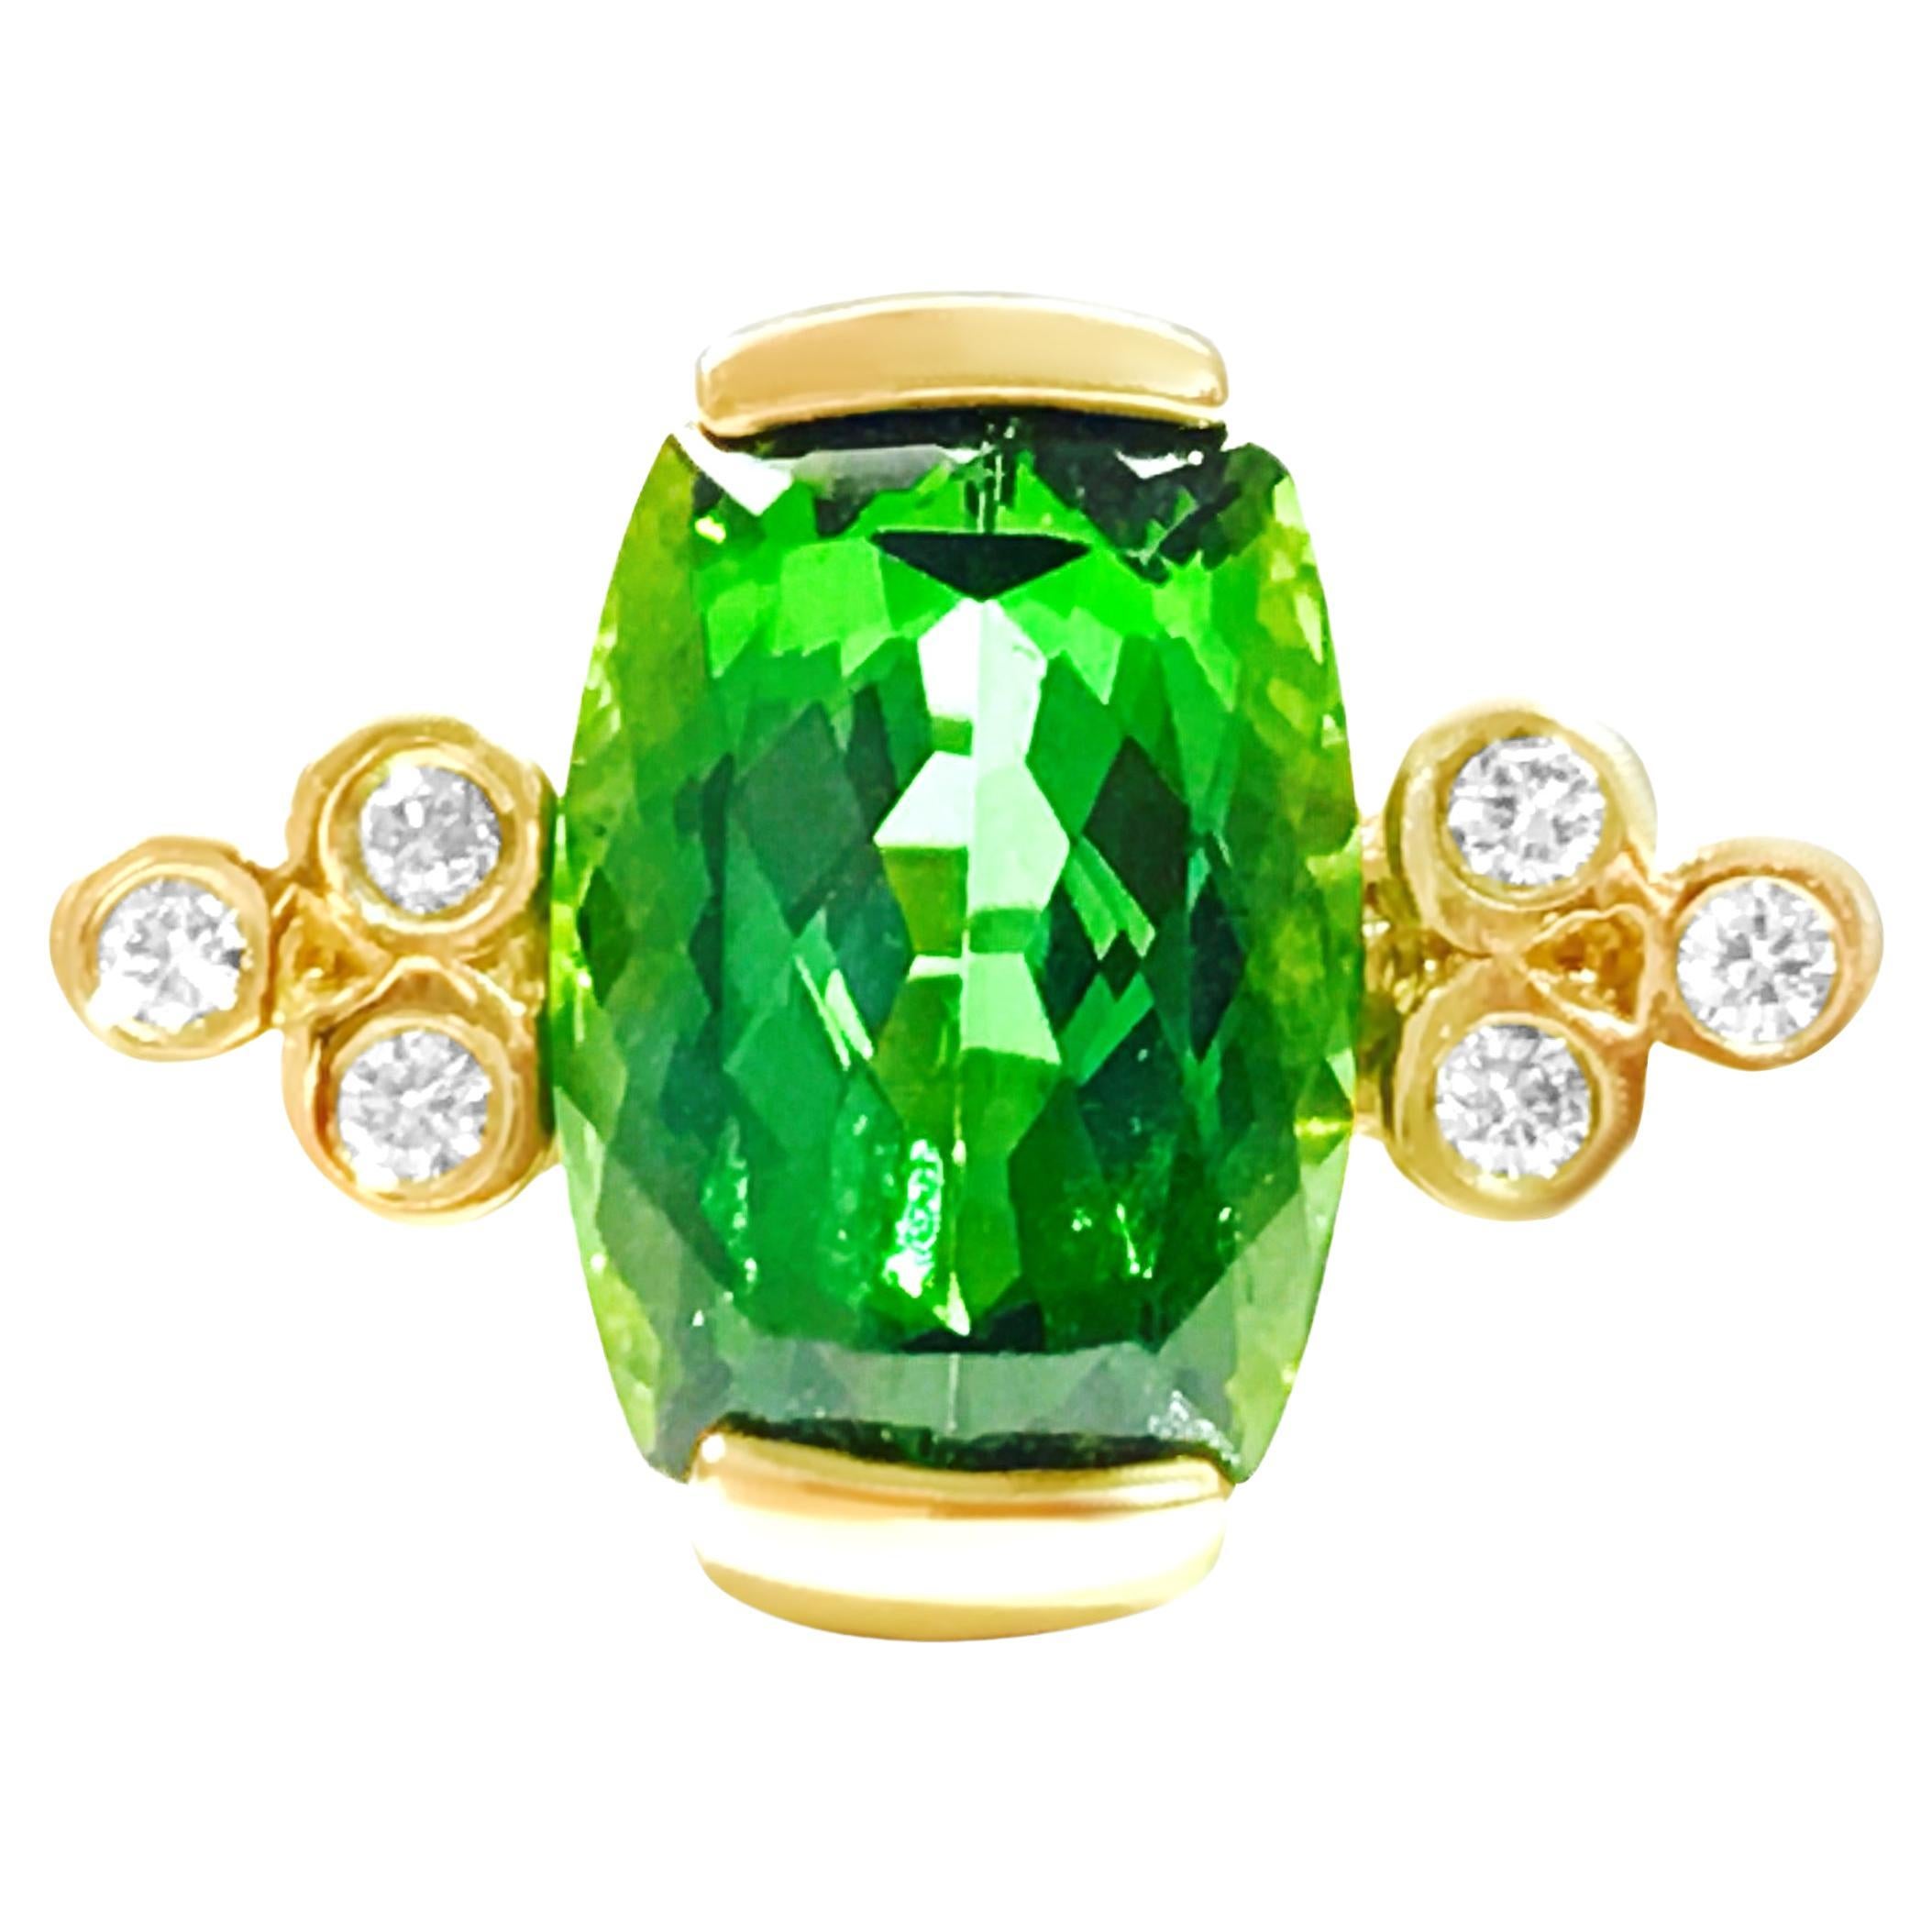 14K Yellow Gold, 4.00 CT Green Tourmaline and Diamond Cocktail Ring